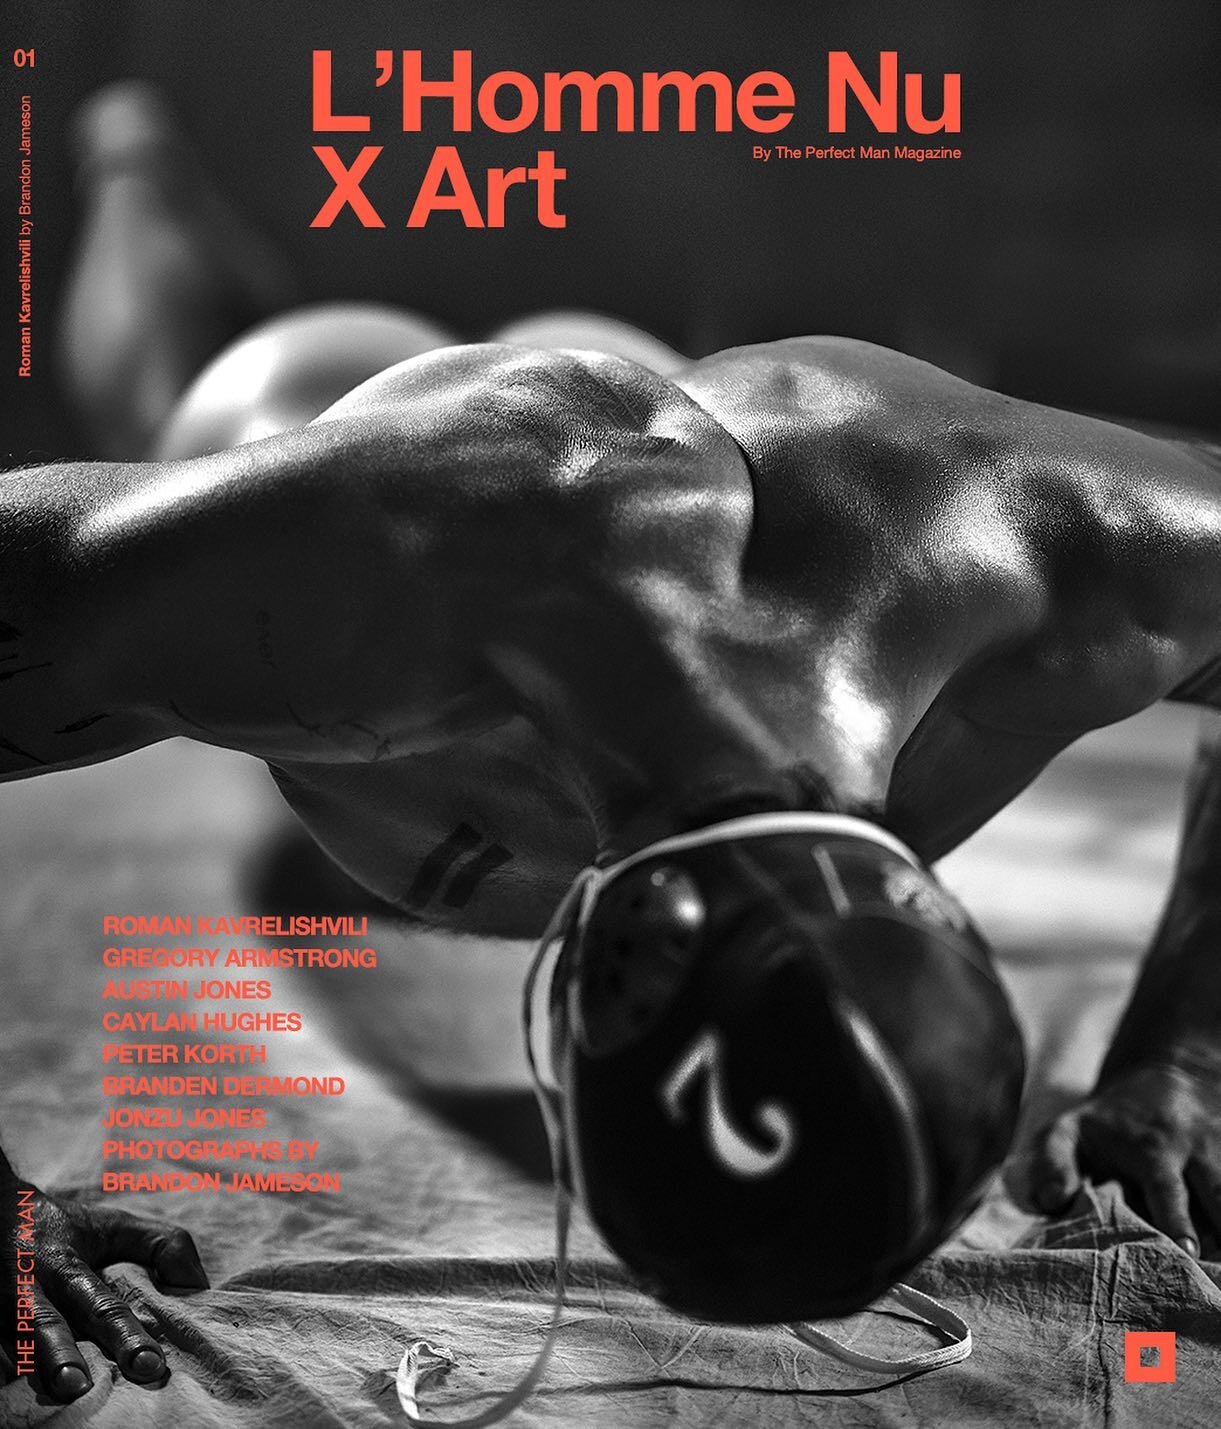 L&rsquo;Homme Nu X Art is the brother publication to L&rsquo;Homme Nu by The Perfect Man. X Art is a special online erotic art space showcasing sensual editorials of perfect men, much like the works photographed by masters Herb Ritts, Mapplethorpe an